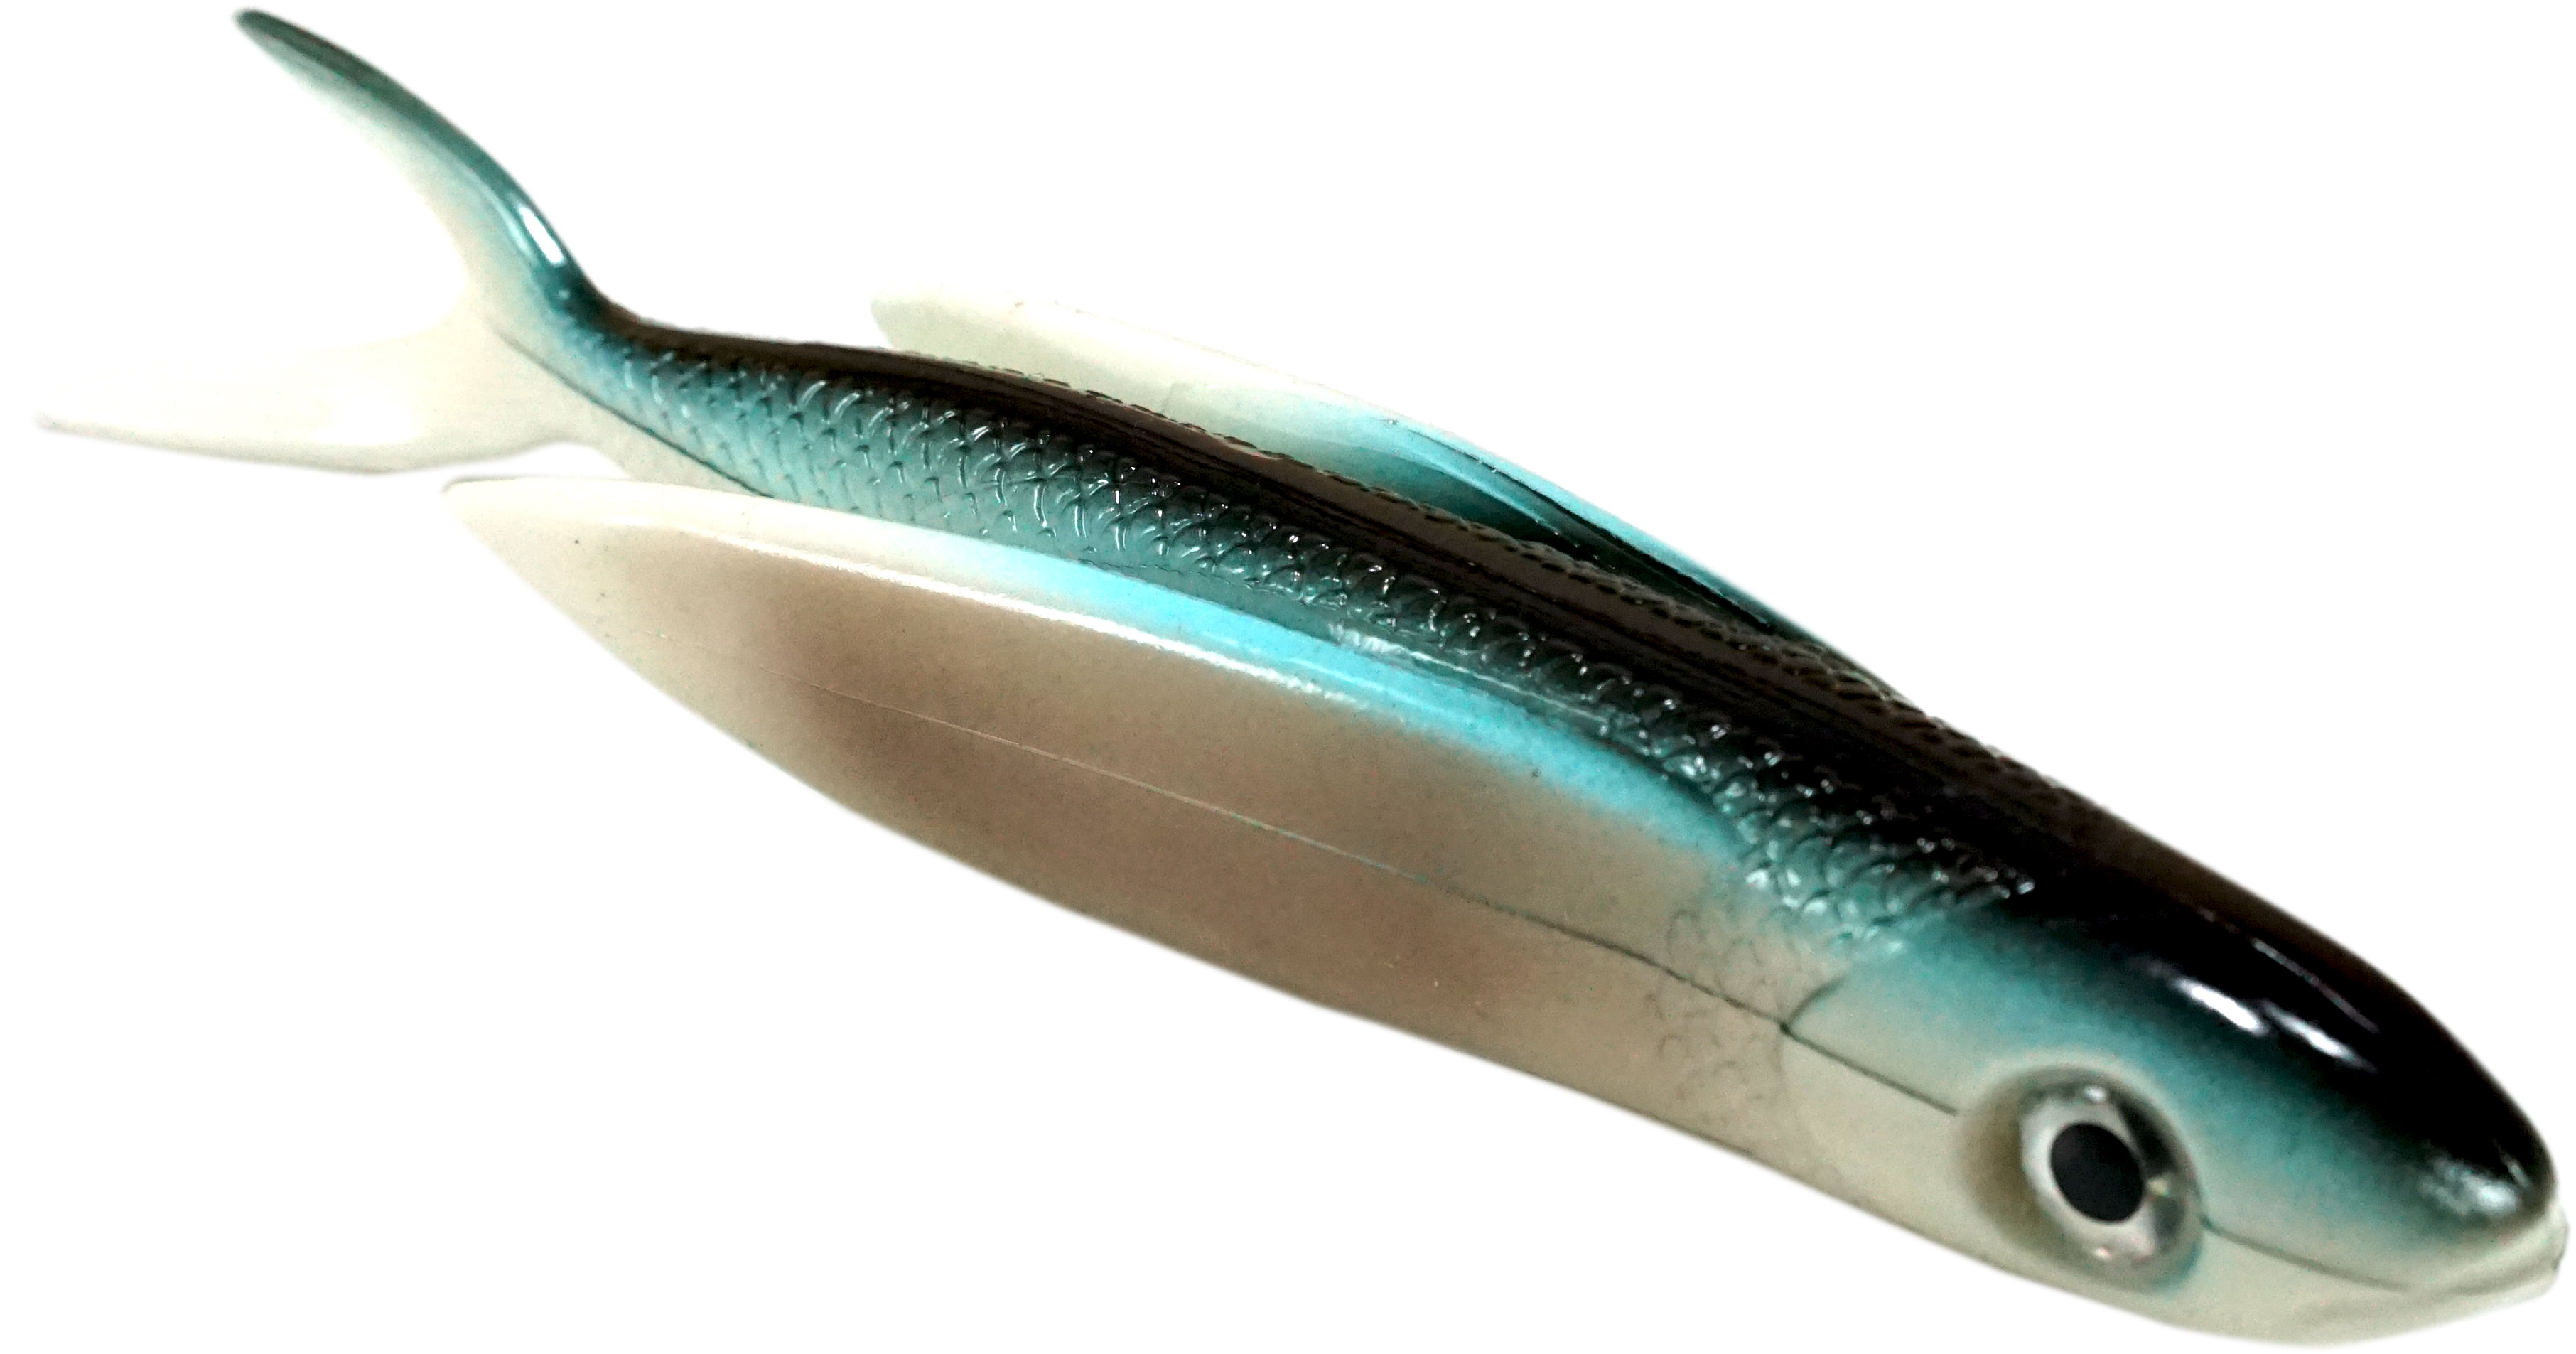 Almost Alive Lures 8.5" Soft Plastic Flying Fish with Swept Back Wing Bait Natural Color